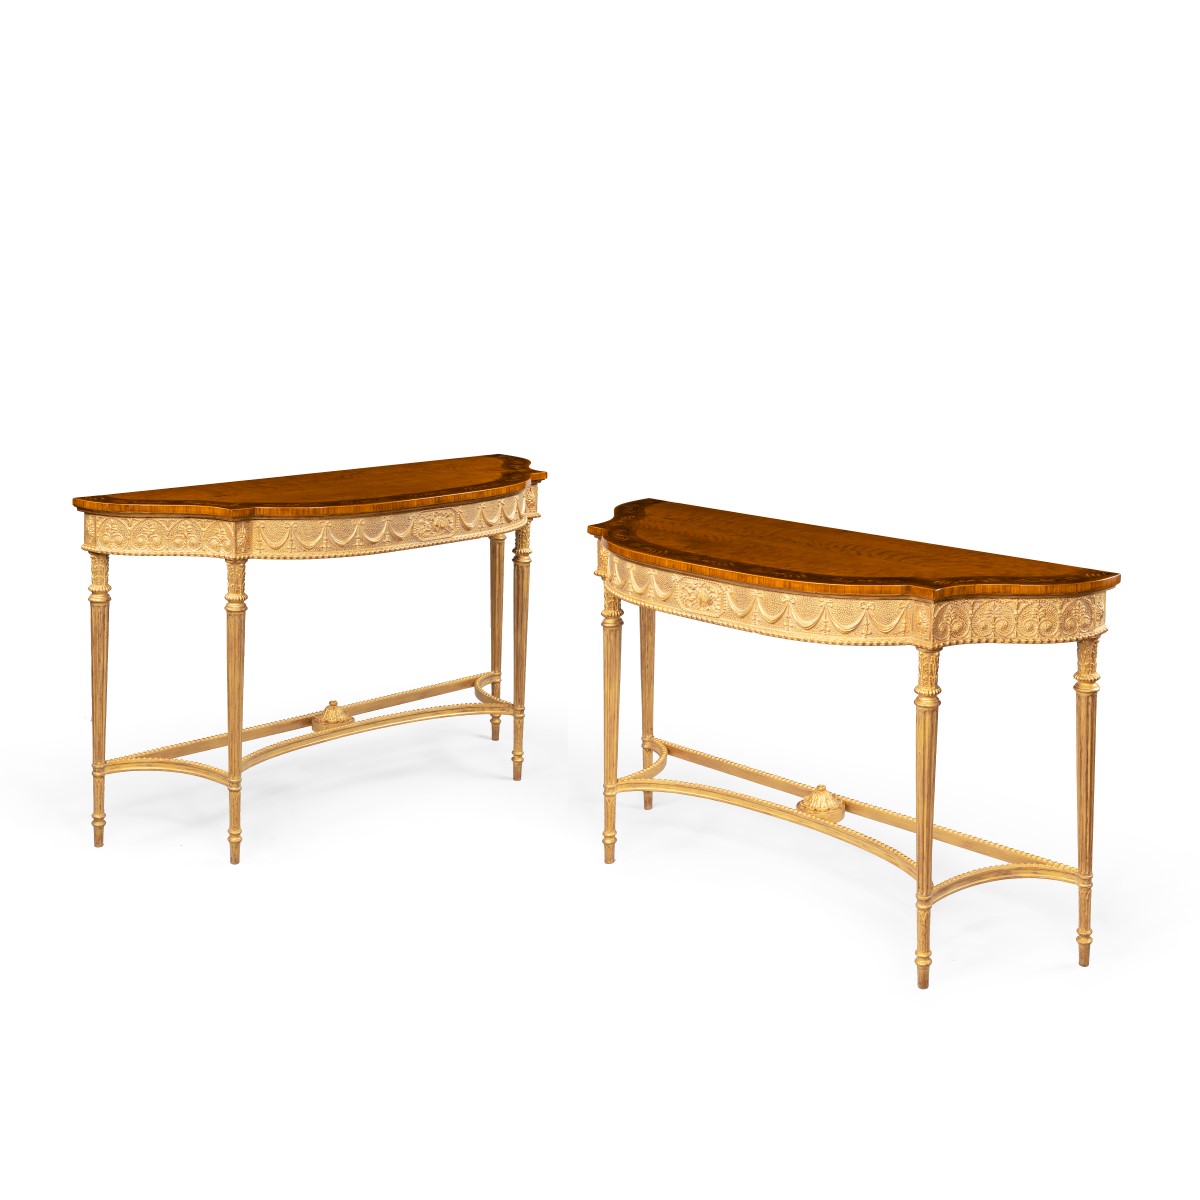 A pair of Victorian Hepplewhite style satinwood console tables